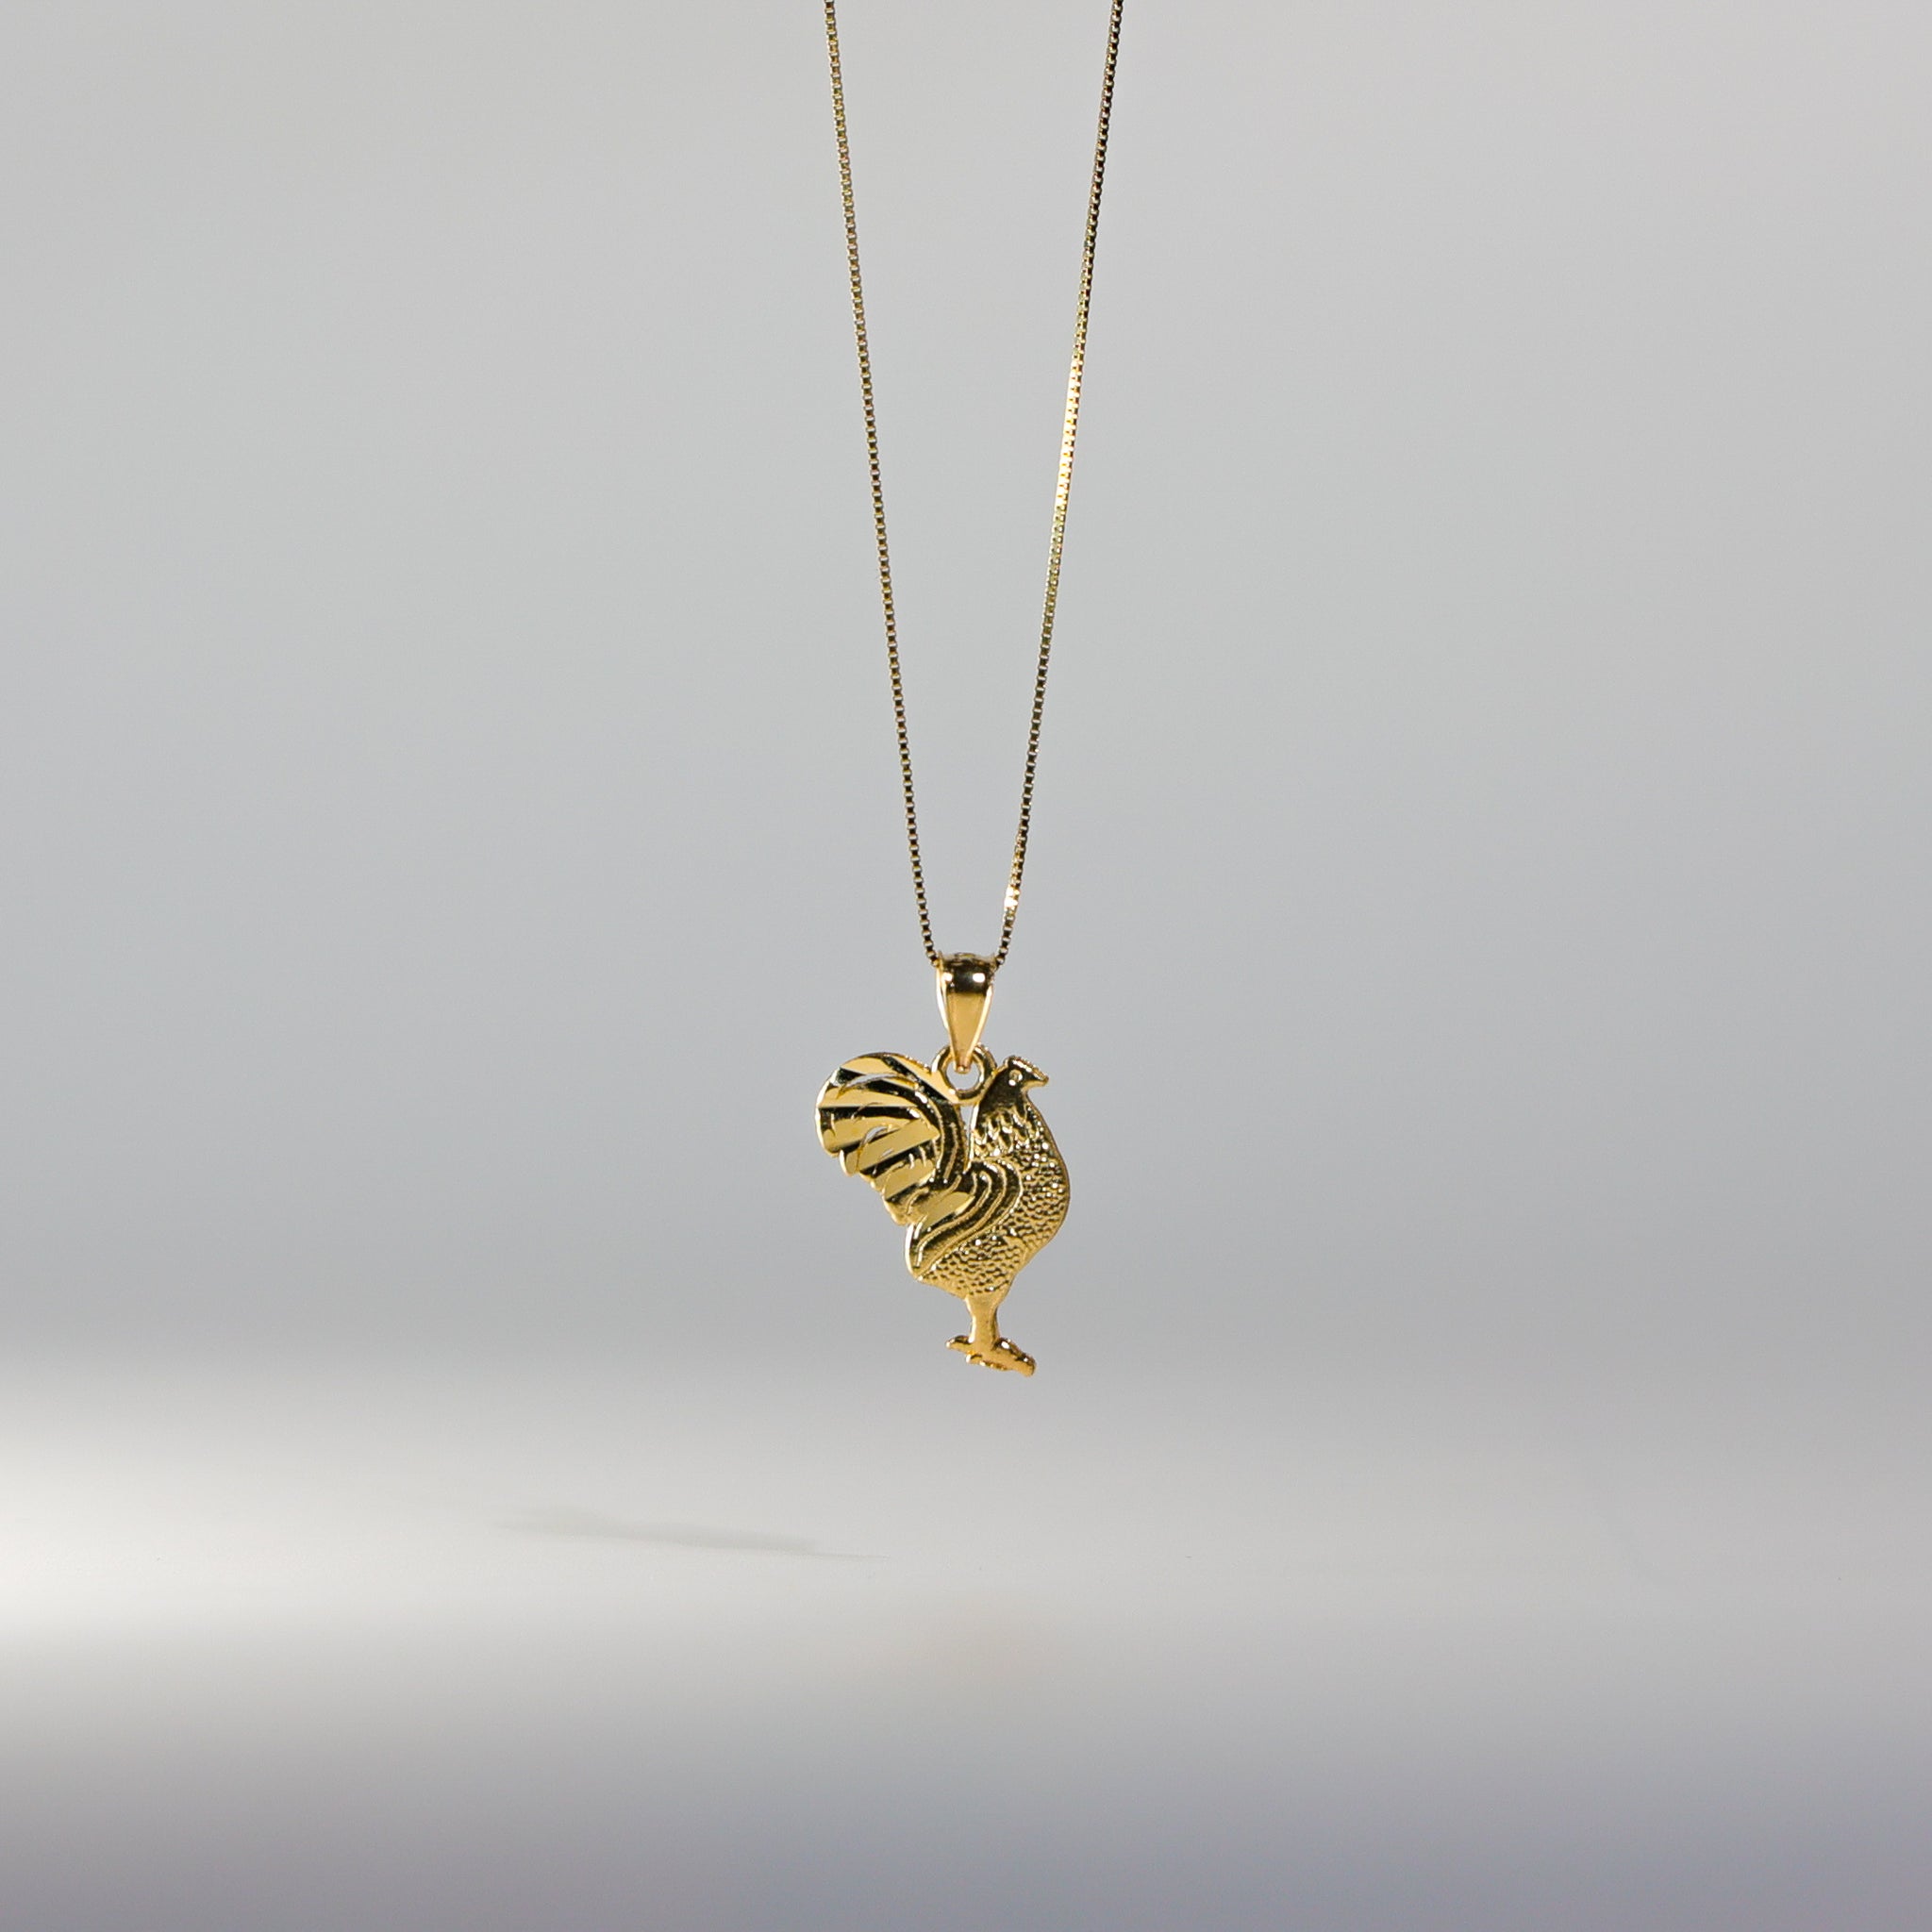 Gold Rooster Pendant Model-1613 - Charlie & Co. Jewelry